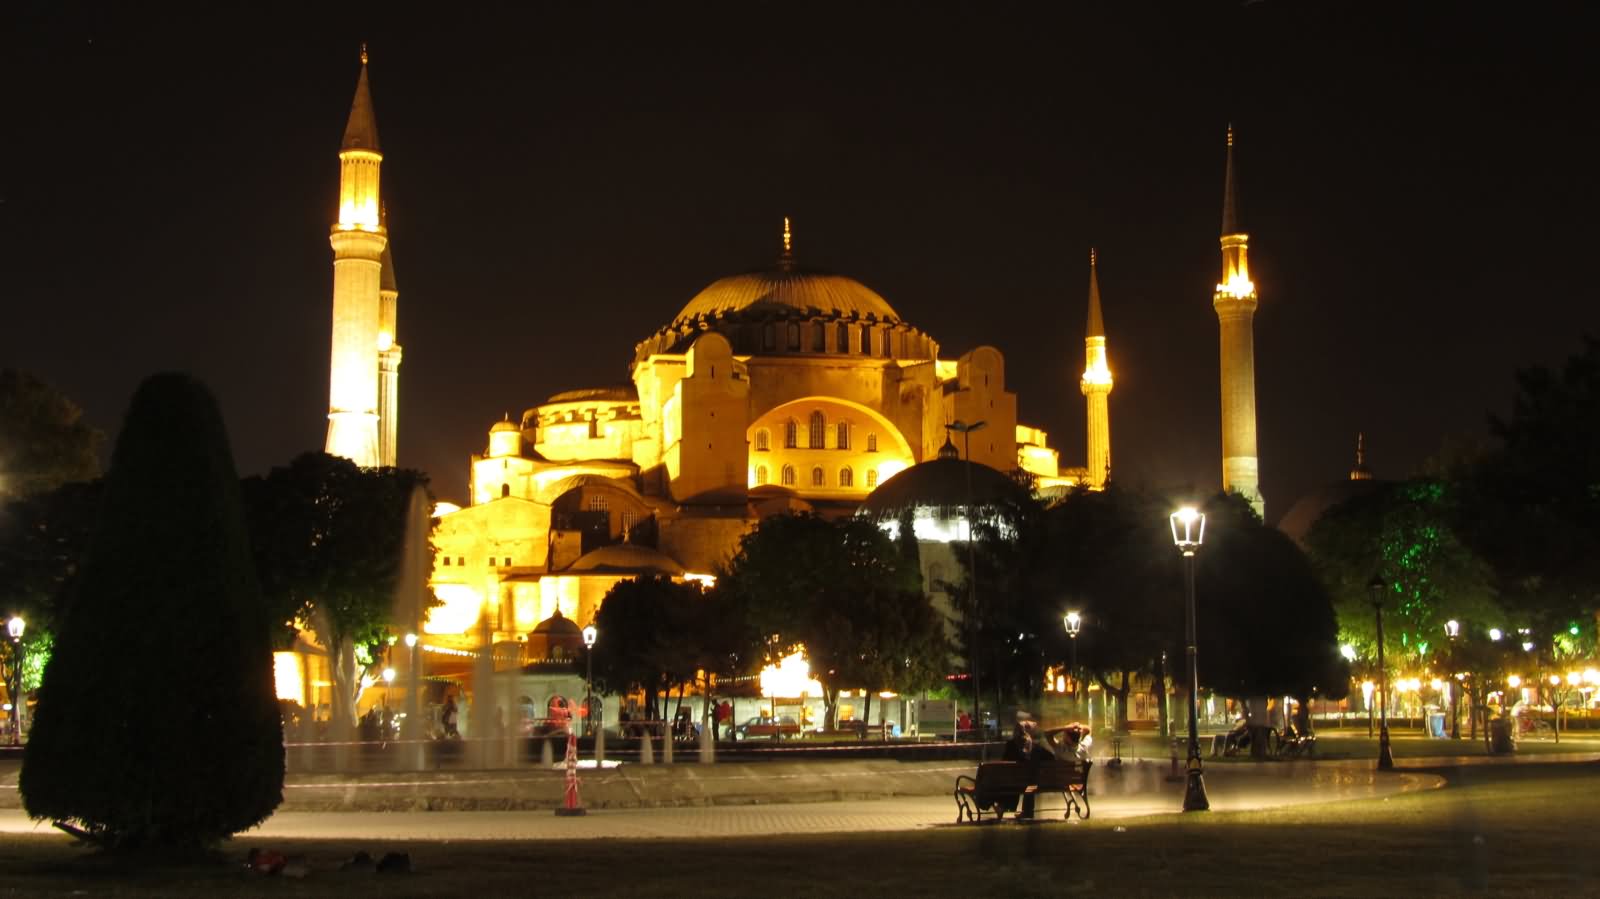 Front Night View Of The Hagia Sophia, Istanbul